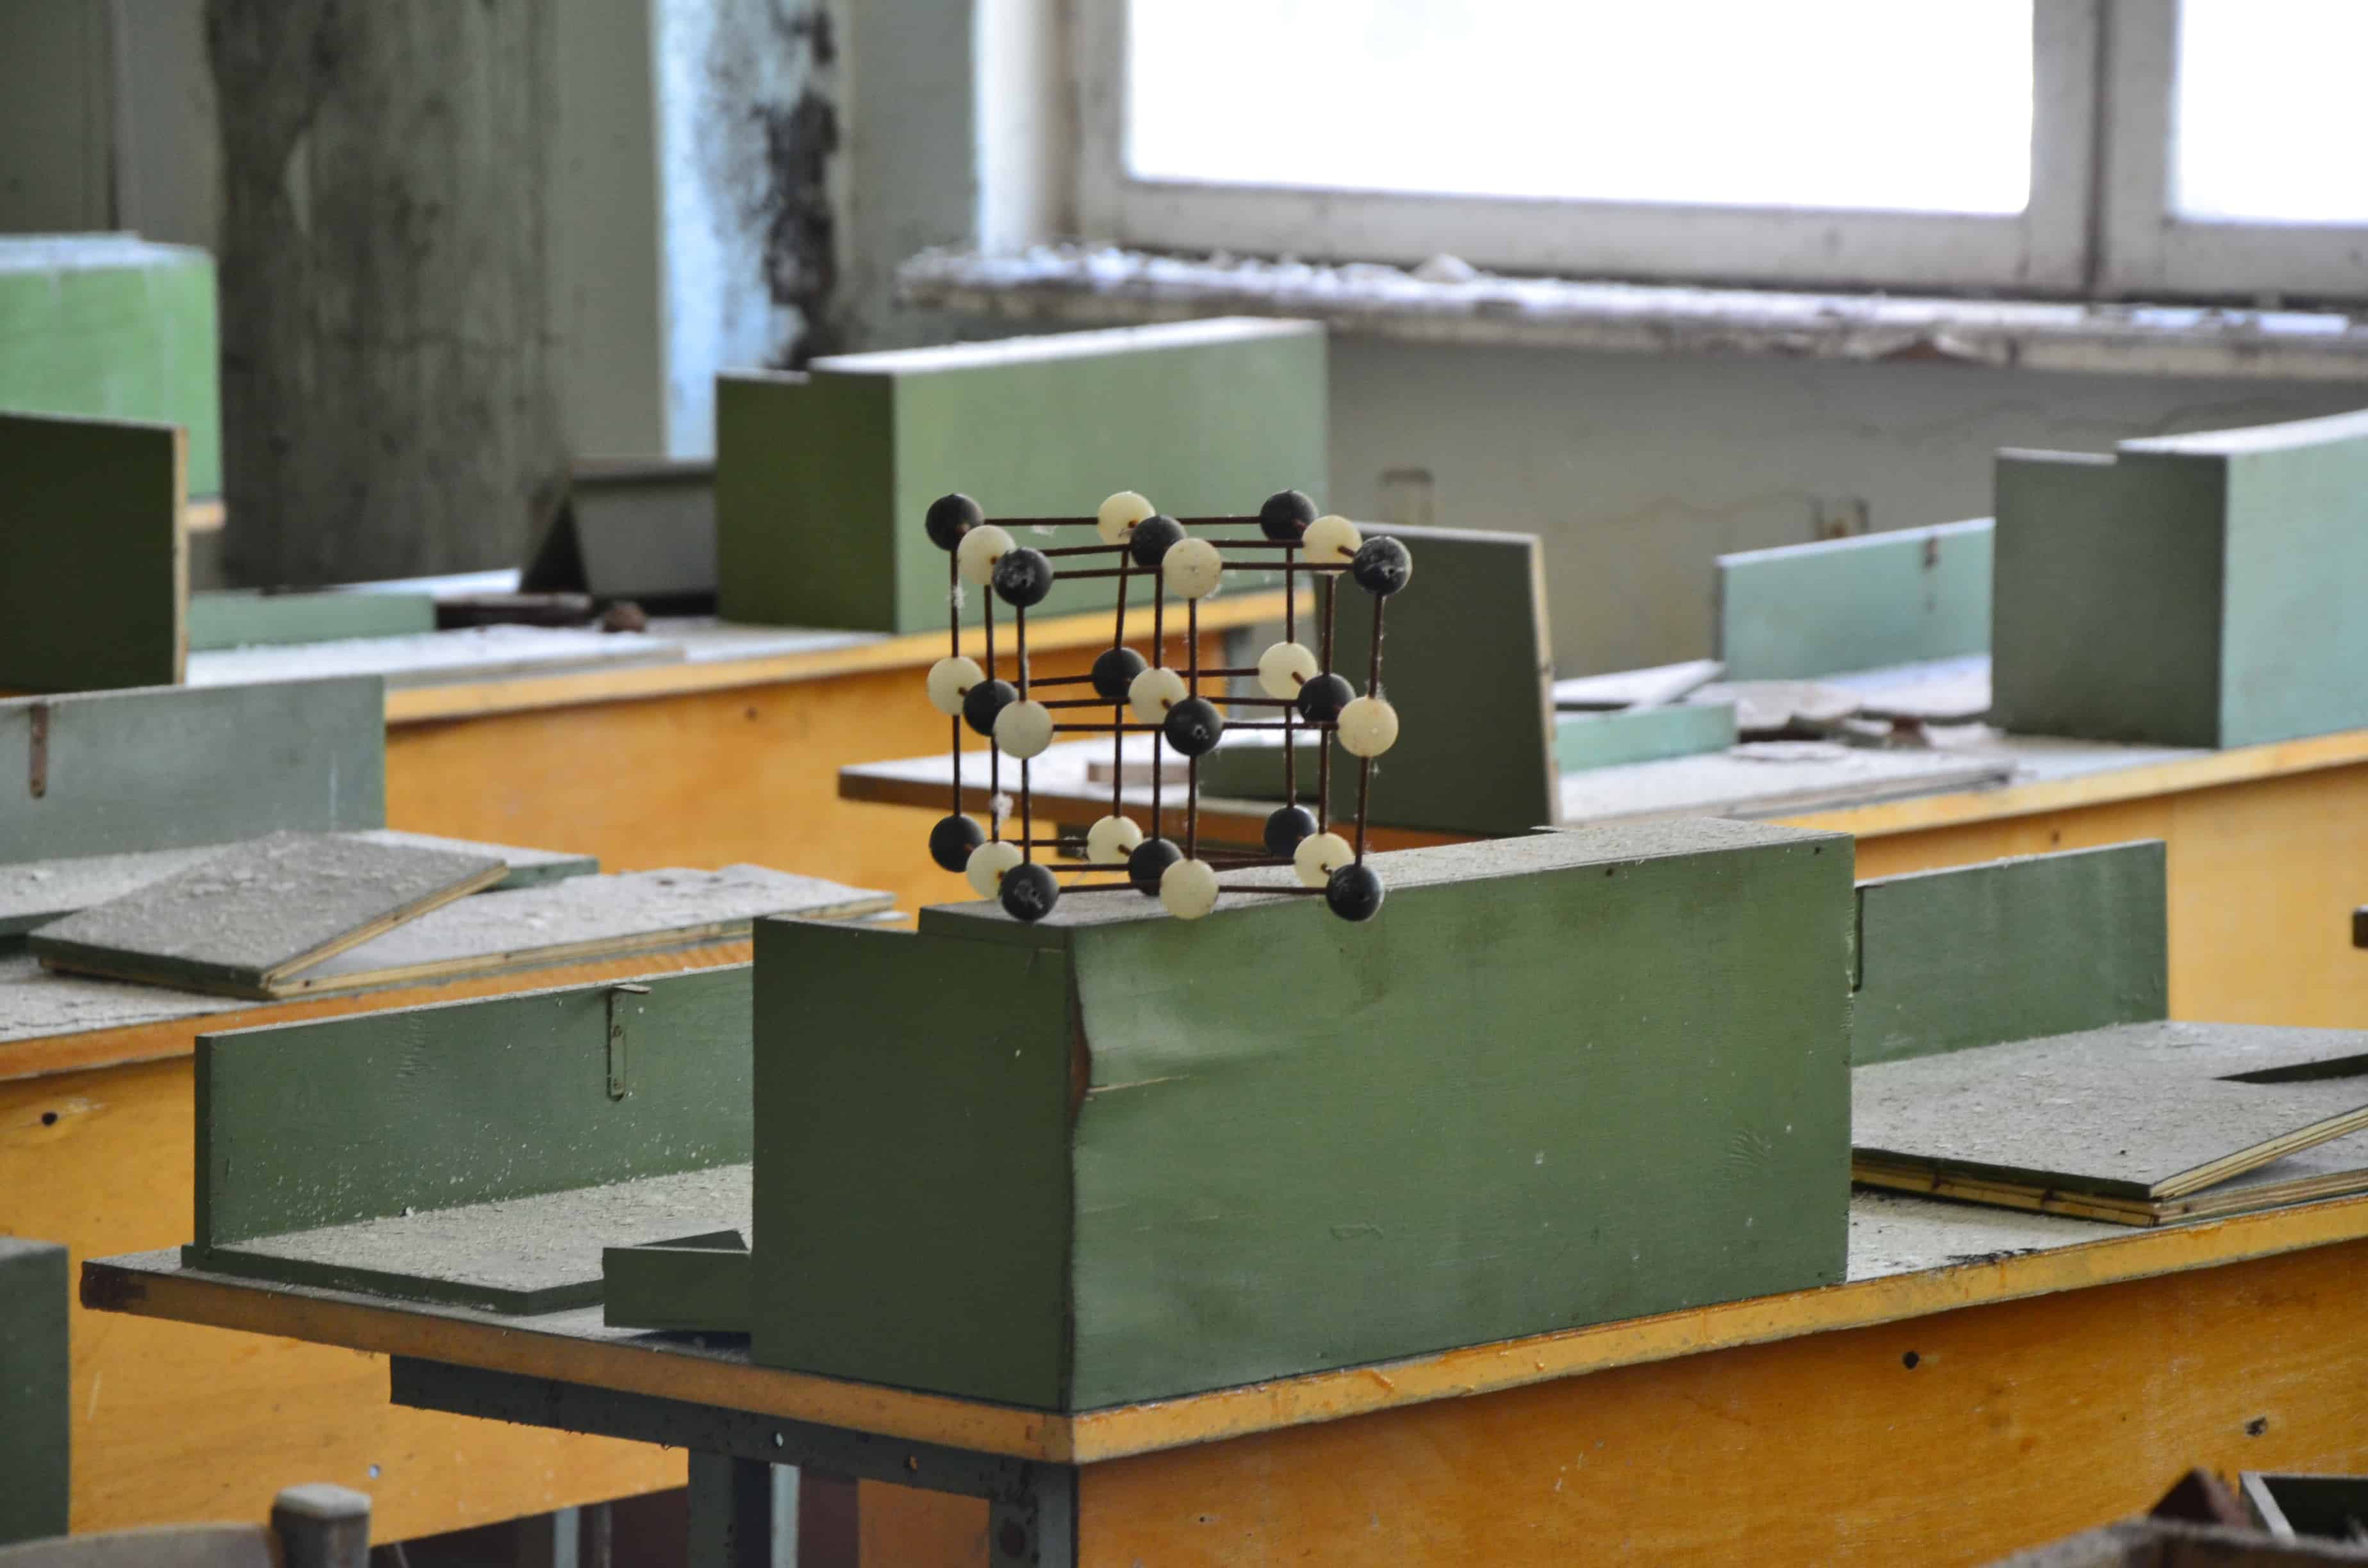 Science lab at Middle School #5 in Pripyat, Chernobyl Exclusion Zone, Ukraine